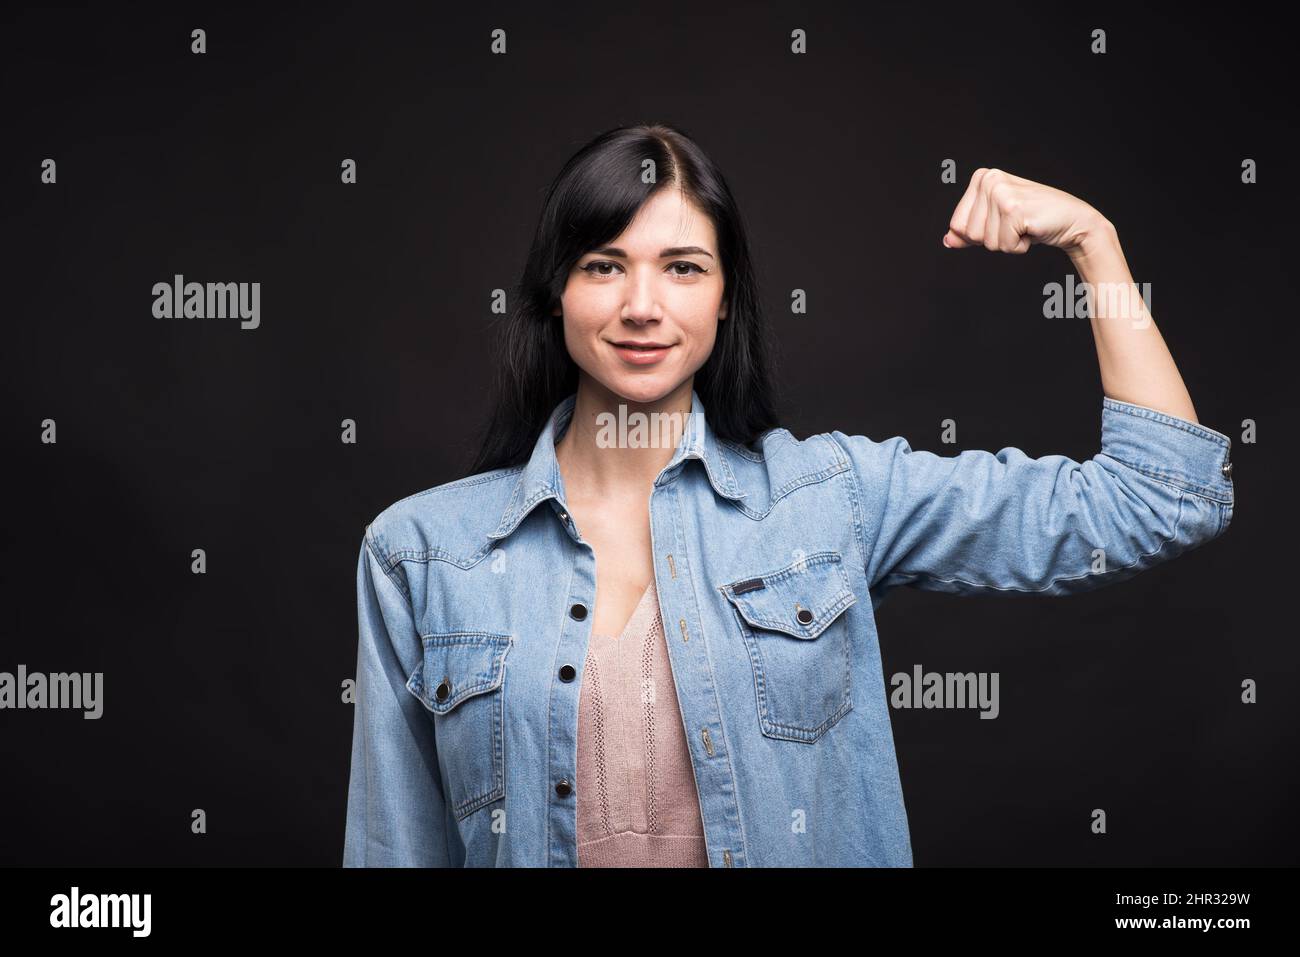 Attractive caucasian brunette girl in a shirt clenching her fist and showing her biceps isolated on a black studio background. Stock Photo